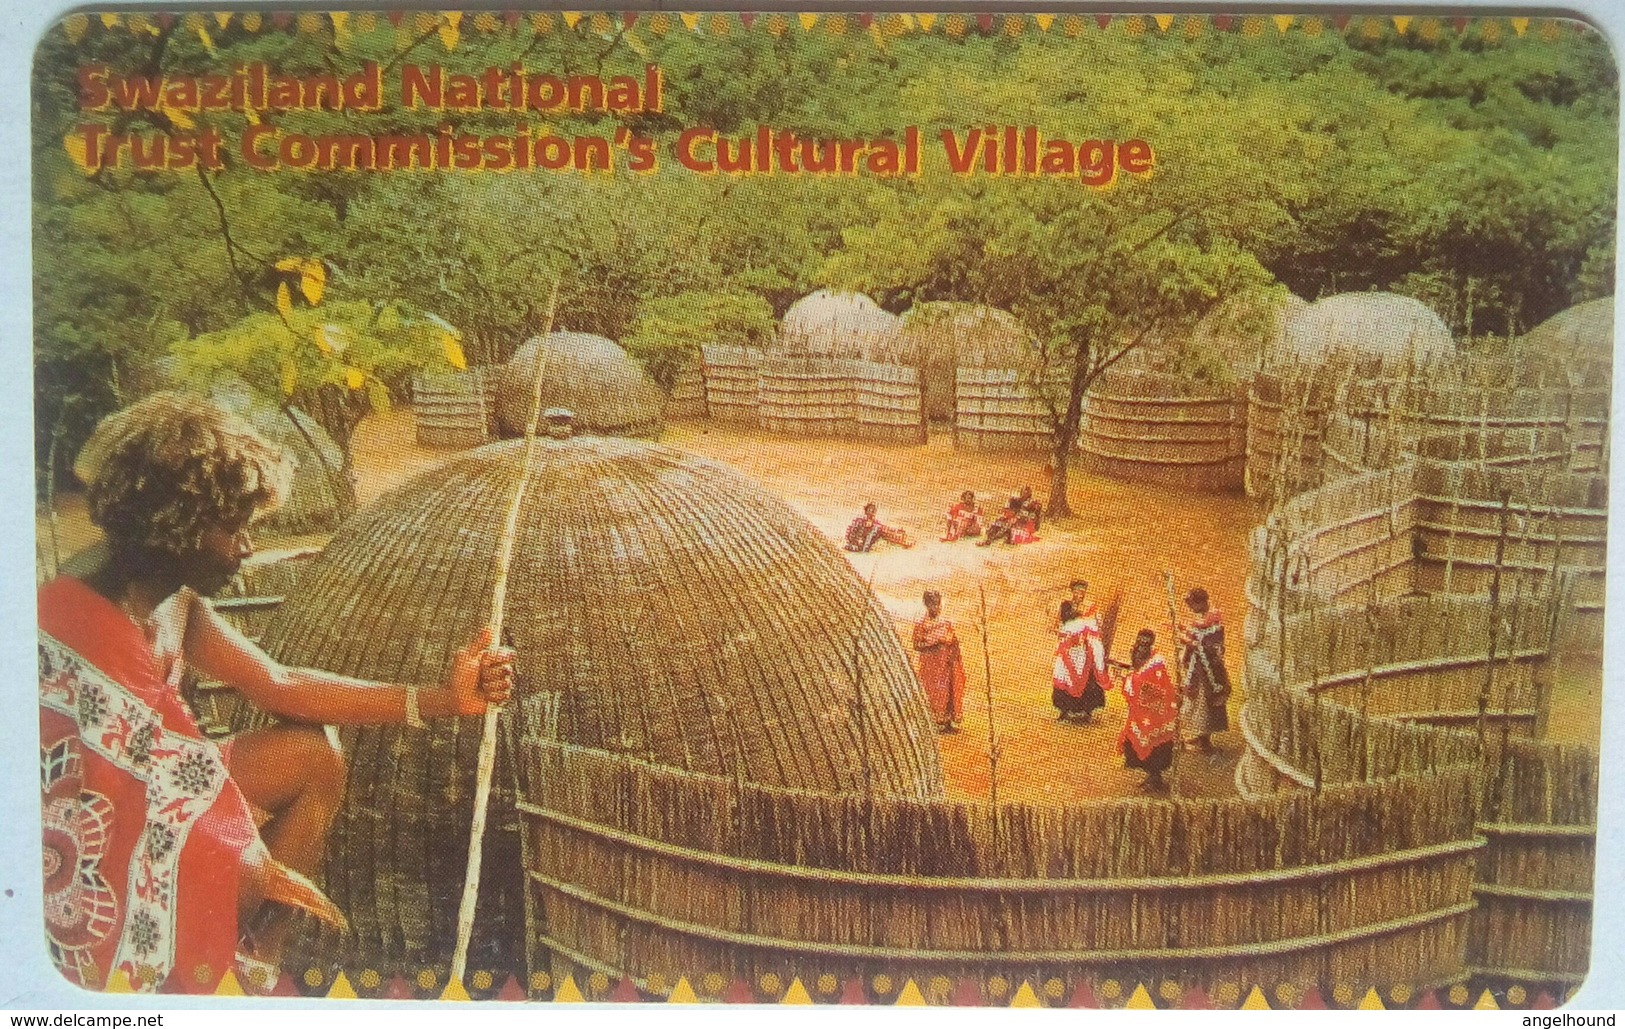 Swaziland National Trust Commision And Cultural Village - Swaziland